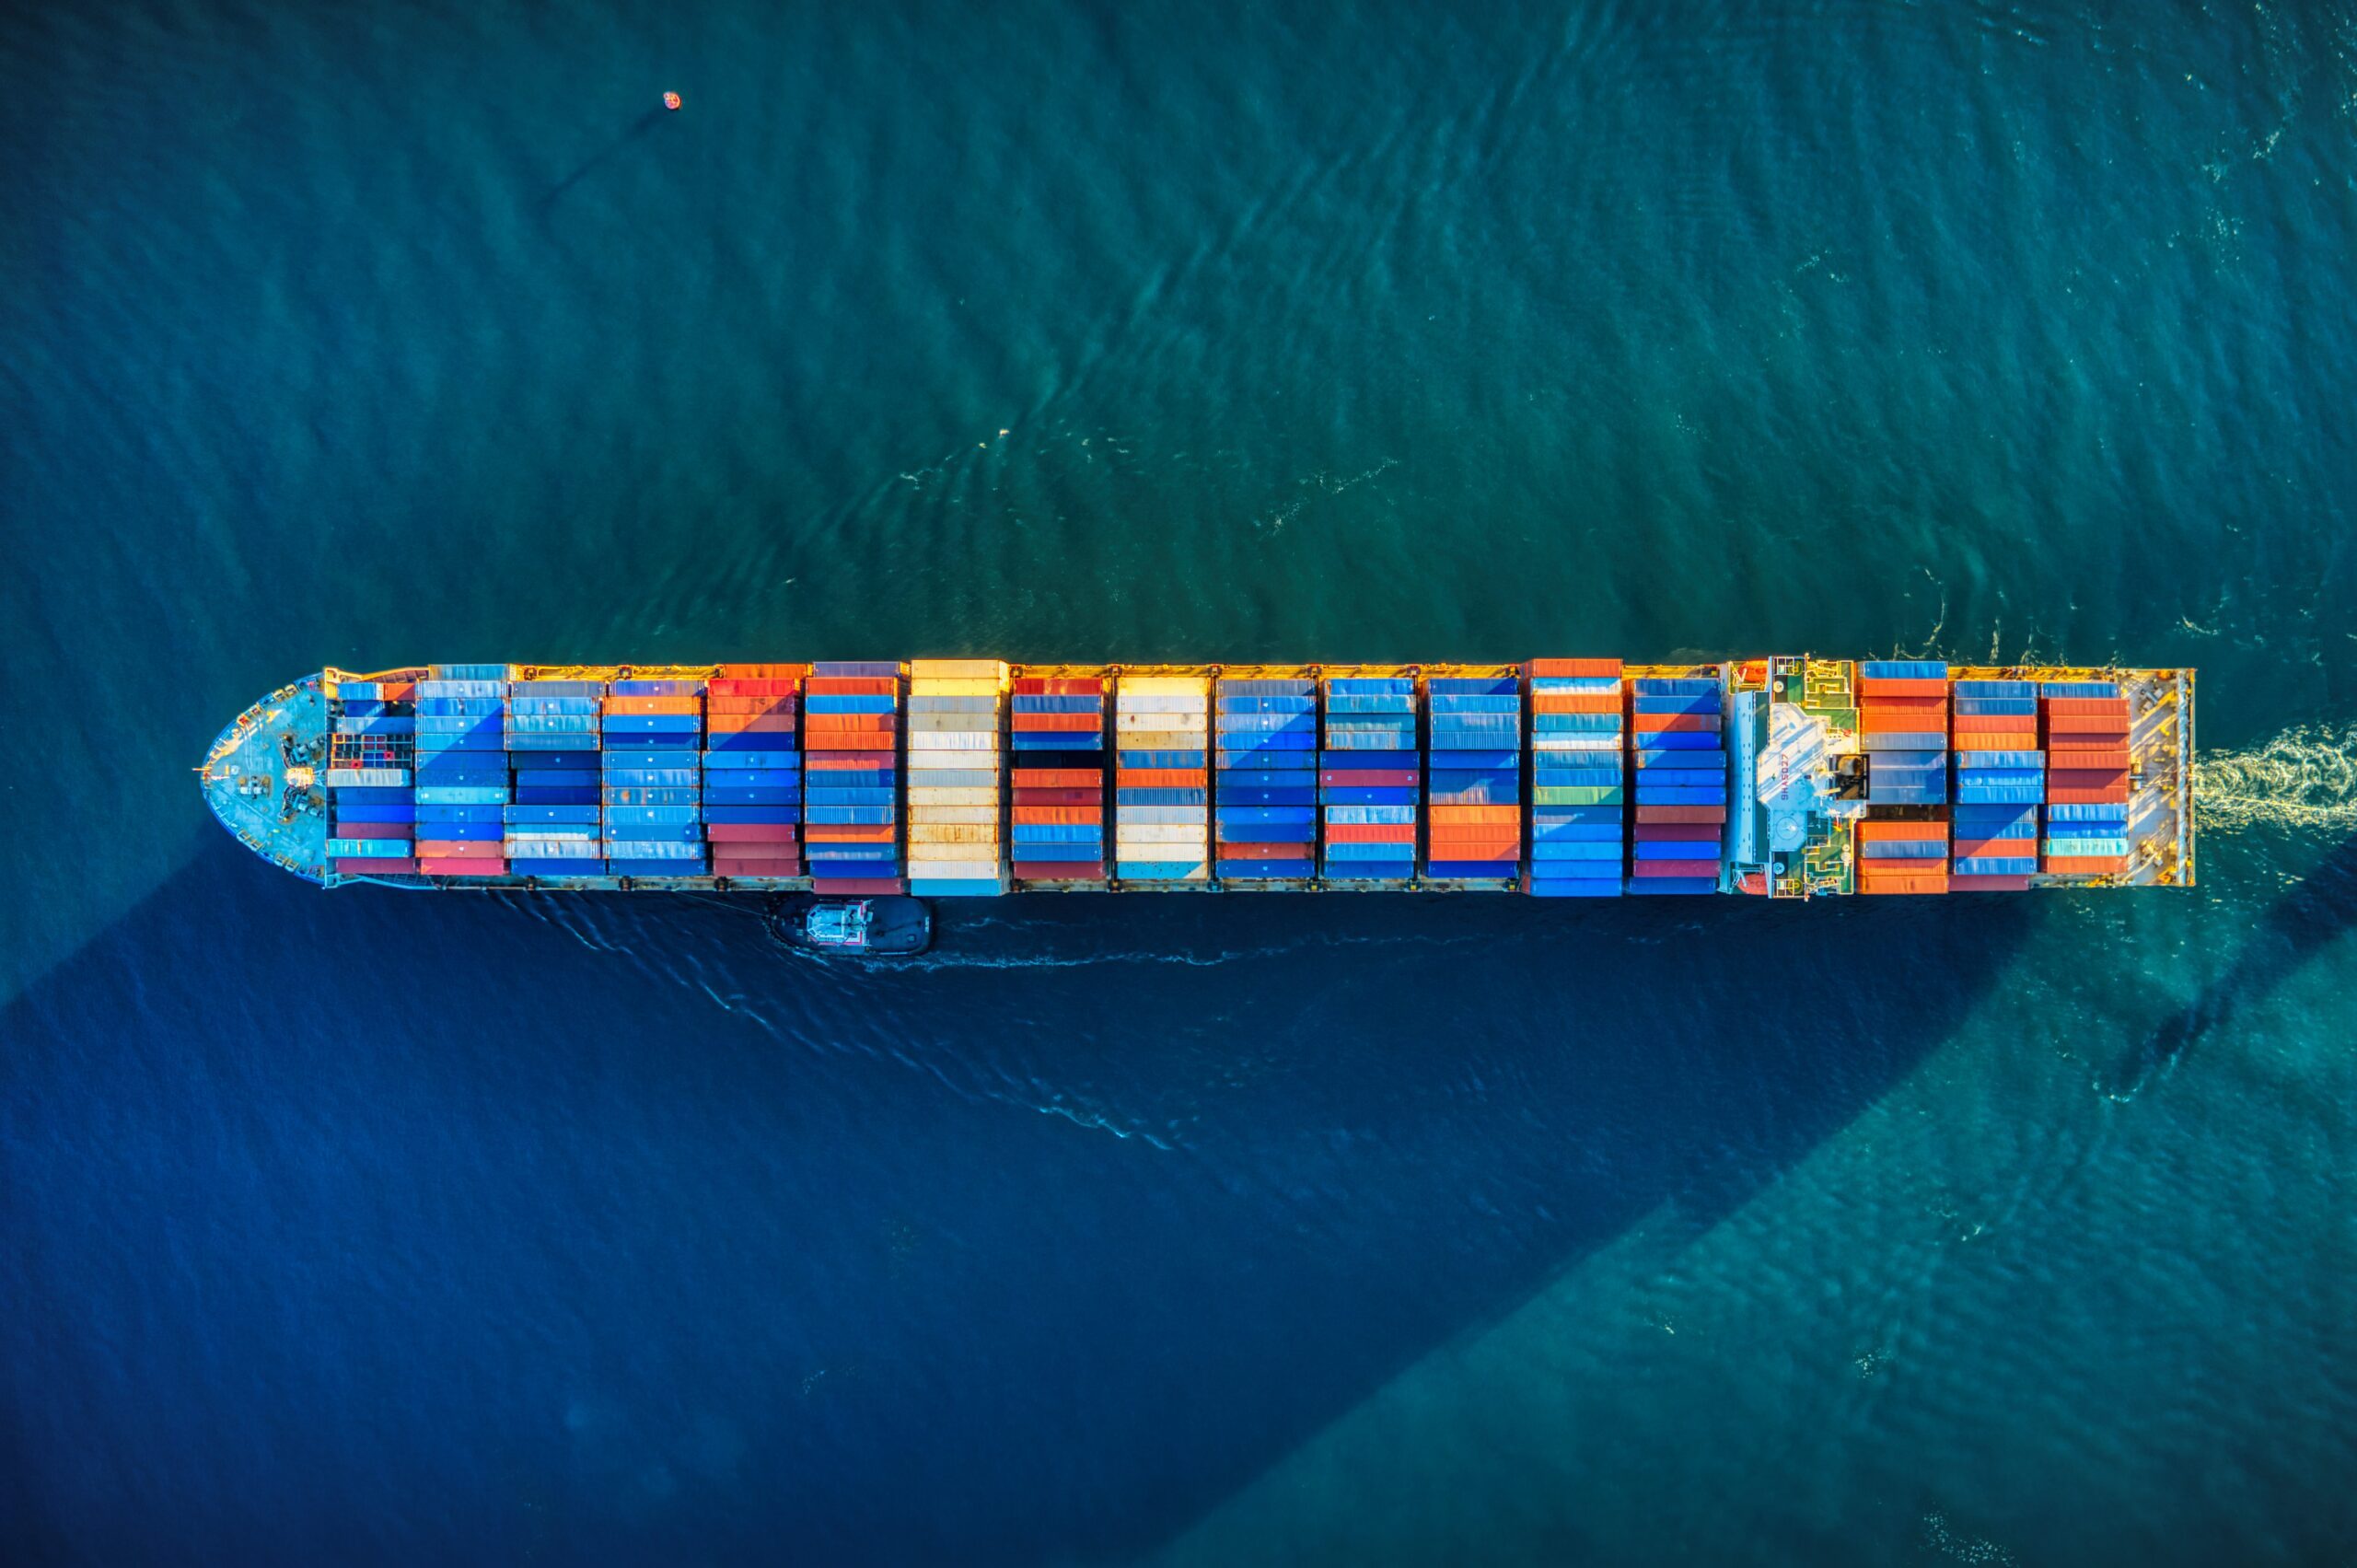 Embracing Change For a Sustainable Shipping Future